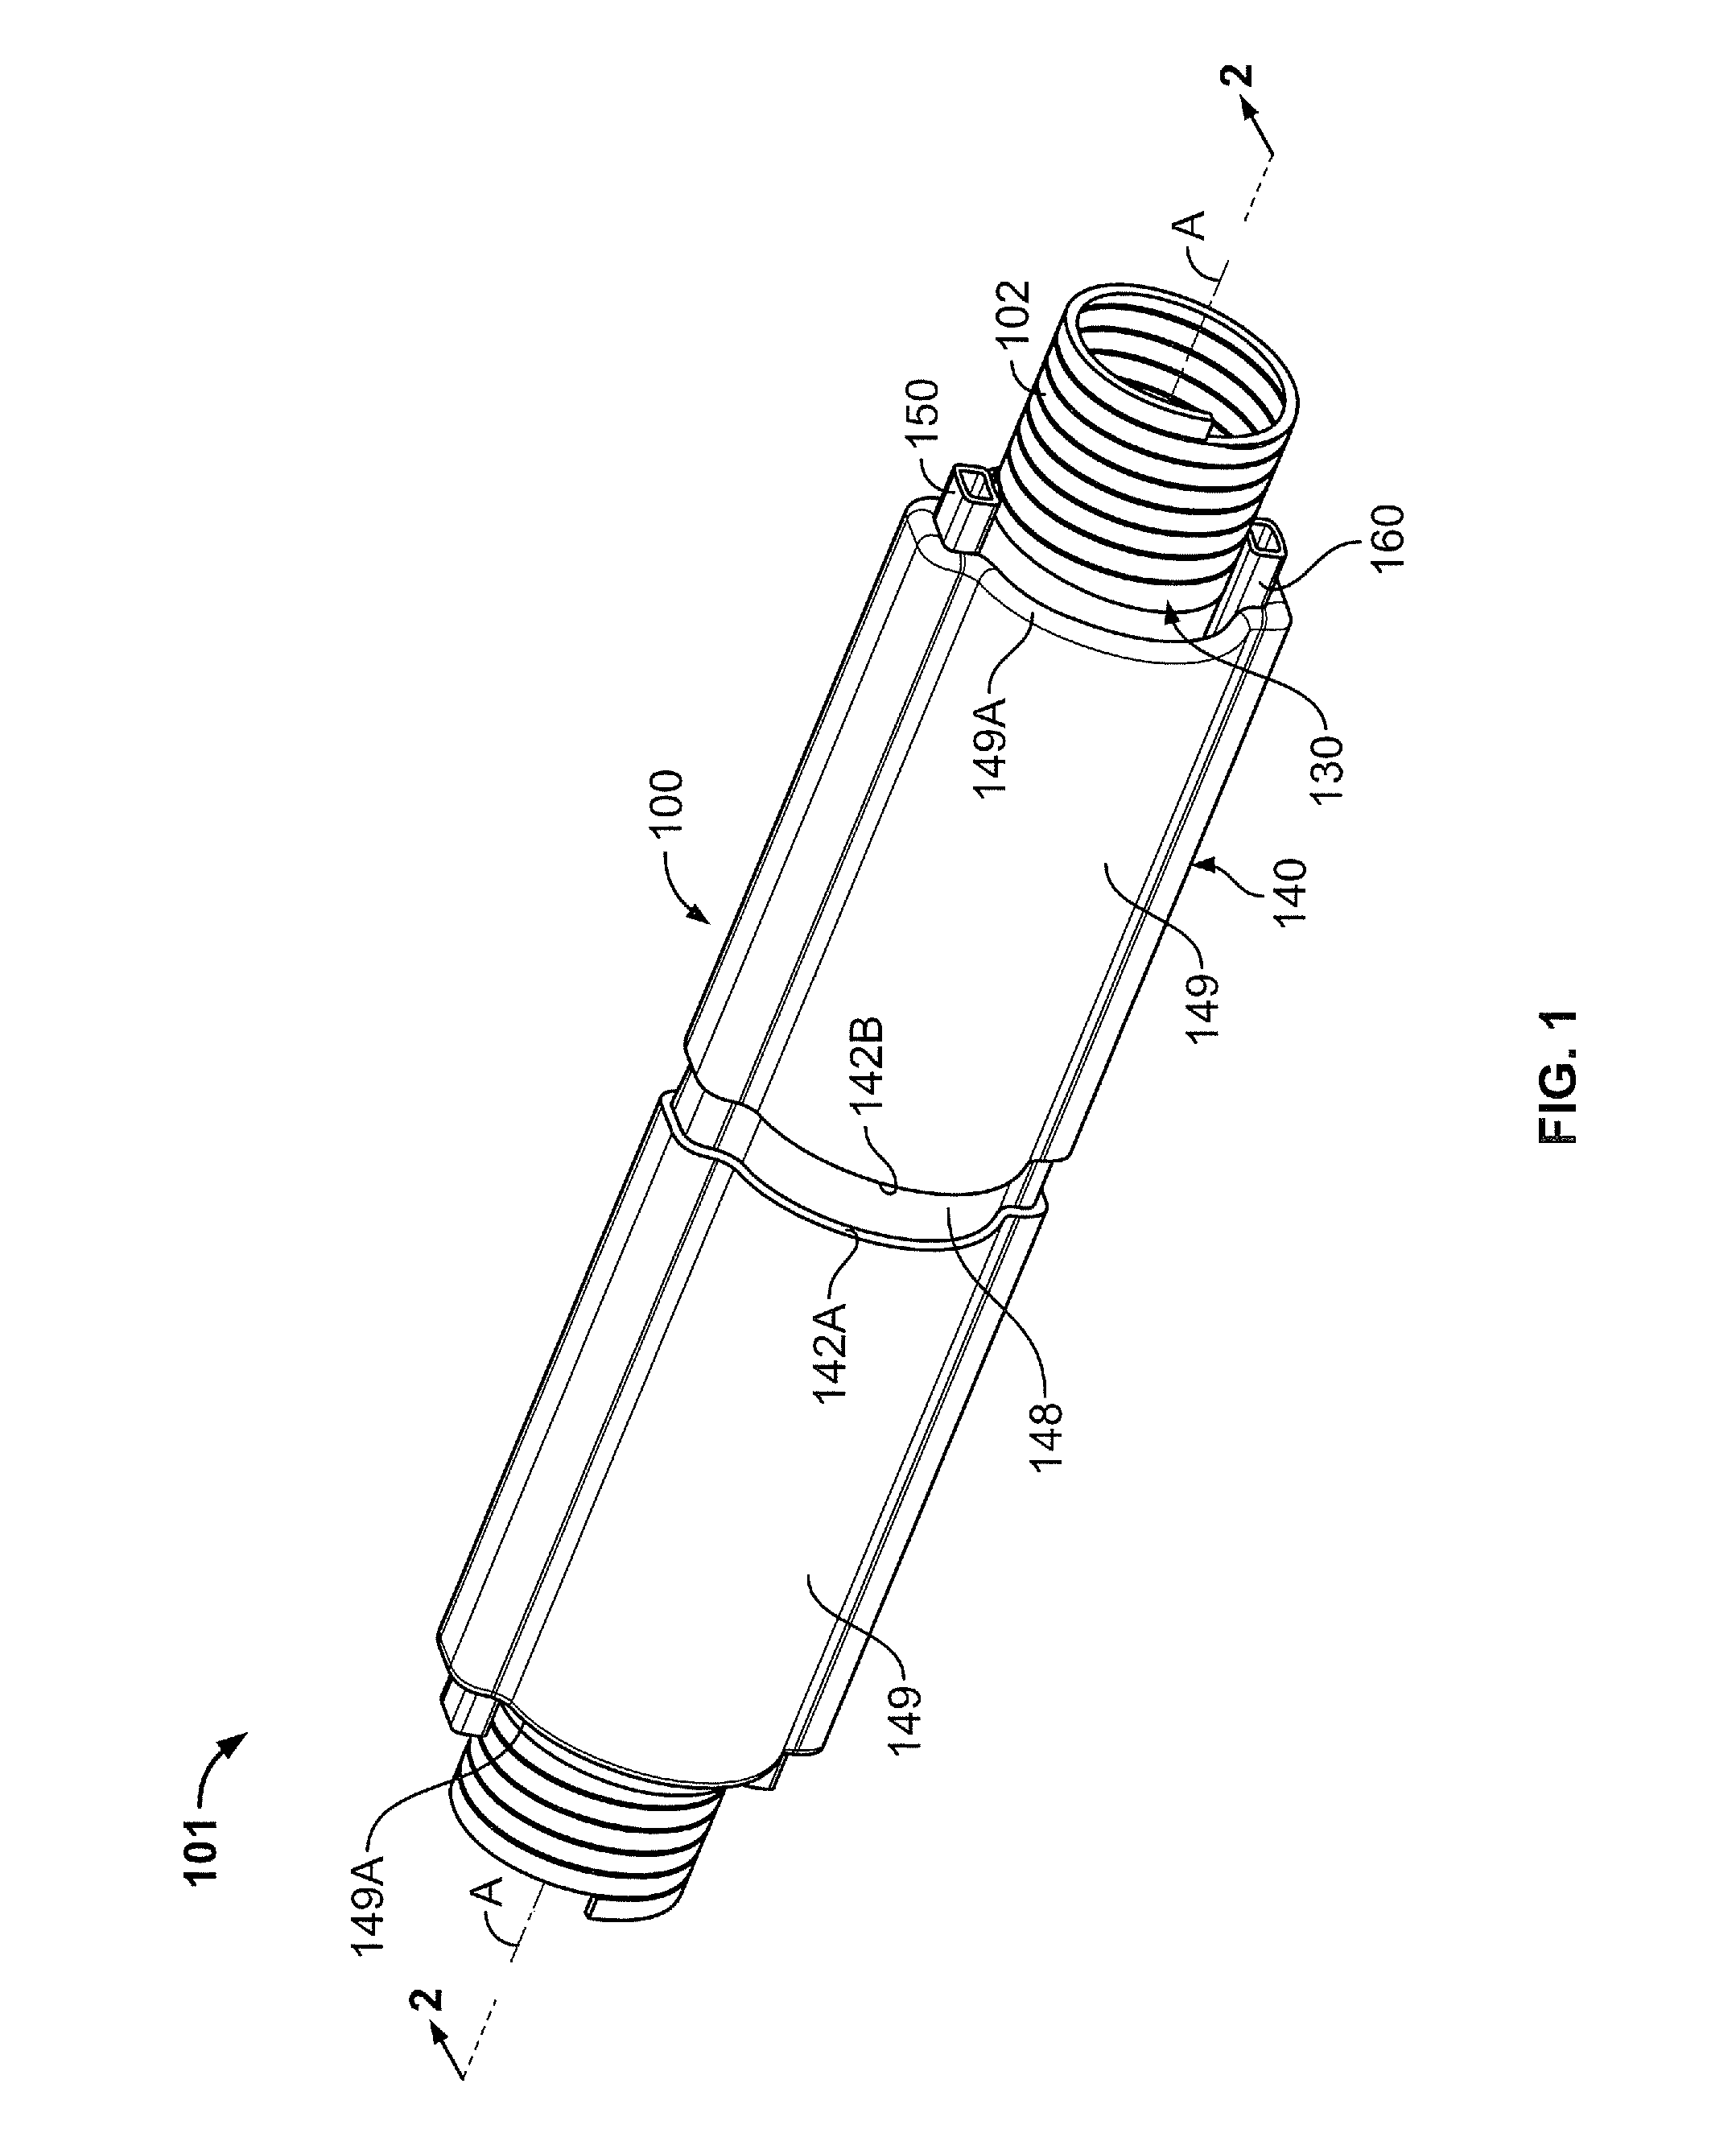 Cover assemblies for cables and electrical connections and methods for making and using the same